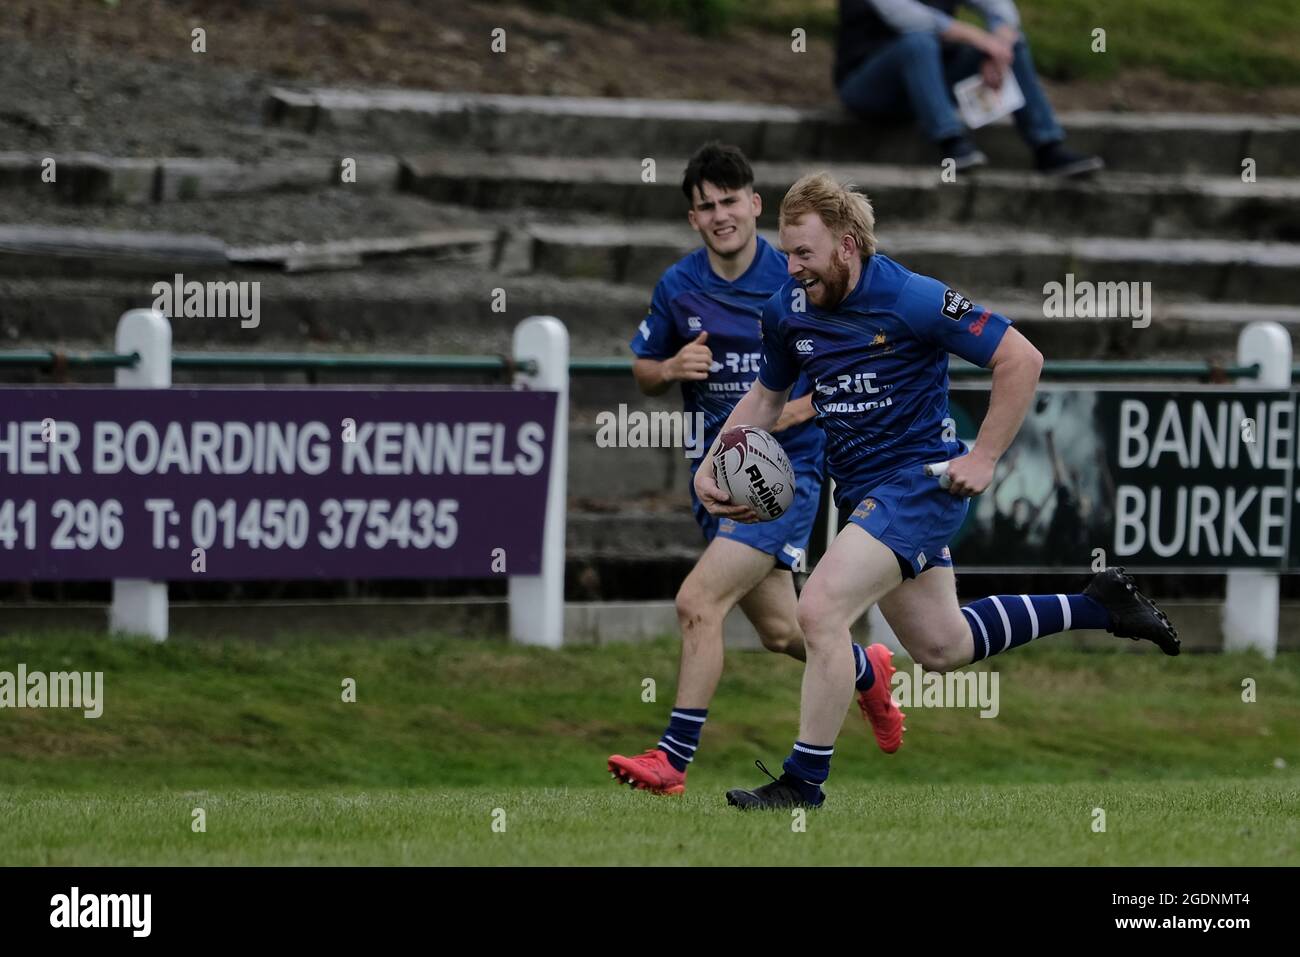 Hawick, UK. 14th Aug, 2021. Action from the Hawick 7s on Saturday 14 August 2021 at Mansfield, Hawick. Rory Marshall (JedForest RFC) on a charge for a try in the pool match against Watsonians. Credit: Rob Gray/Alamy Live News Stock Photo